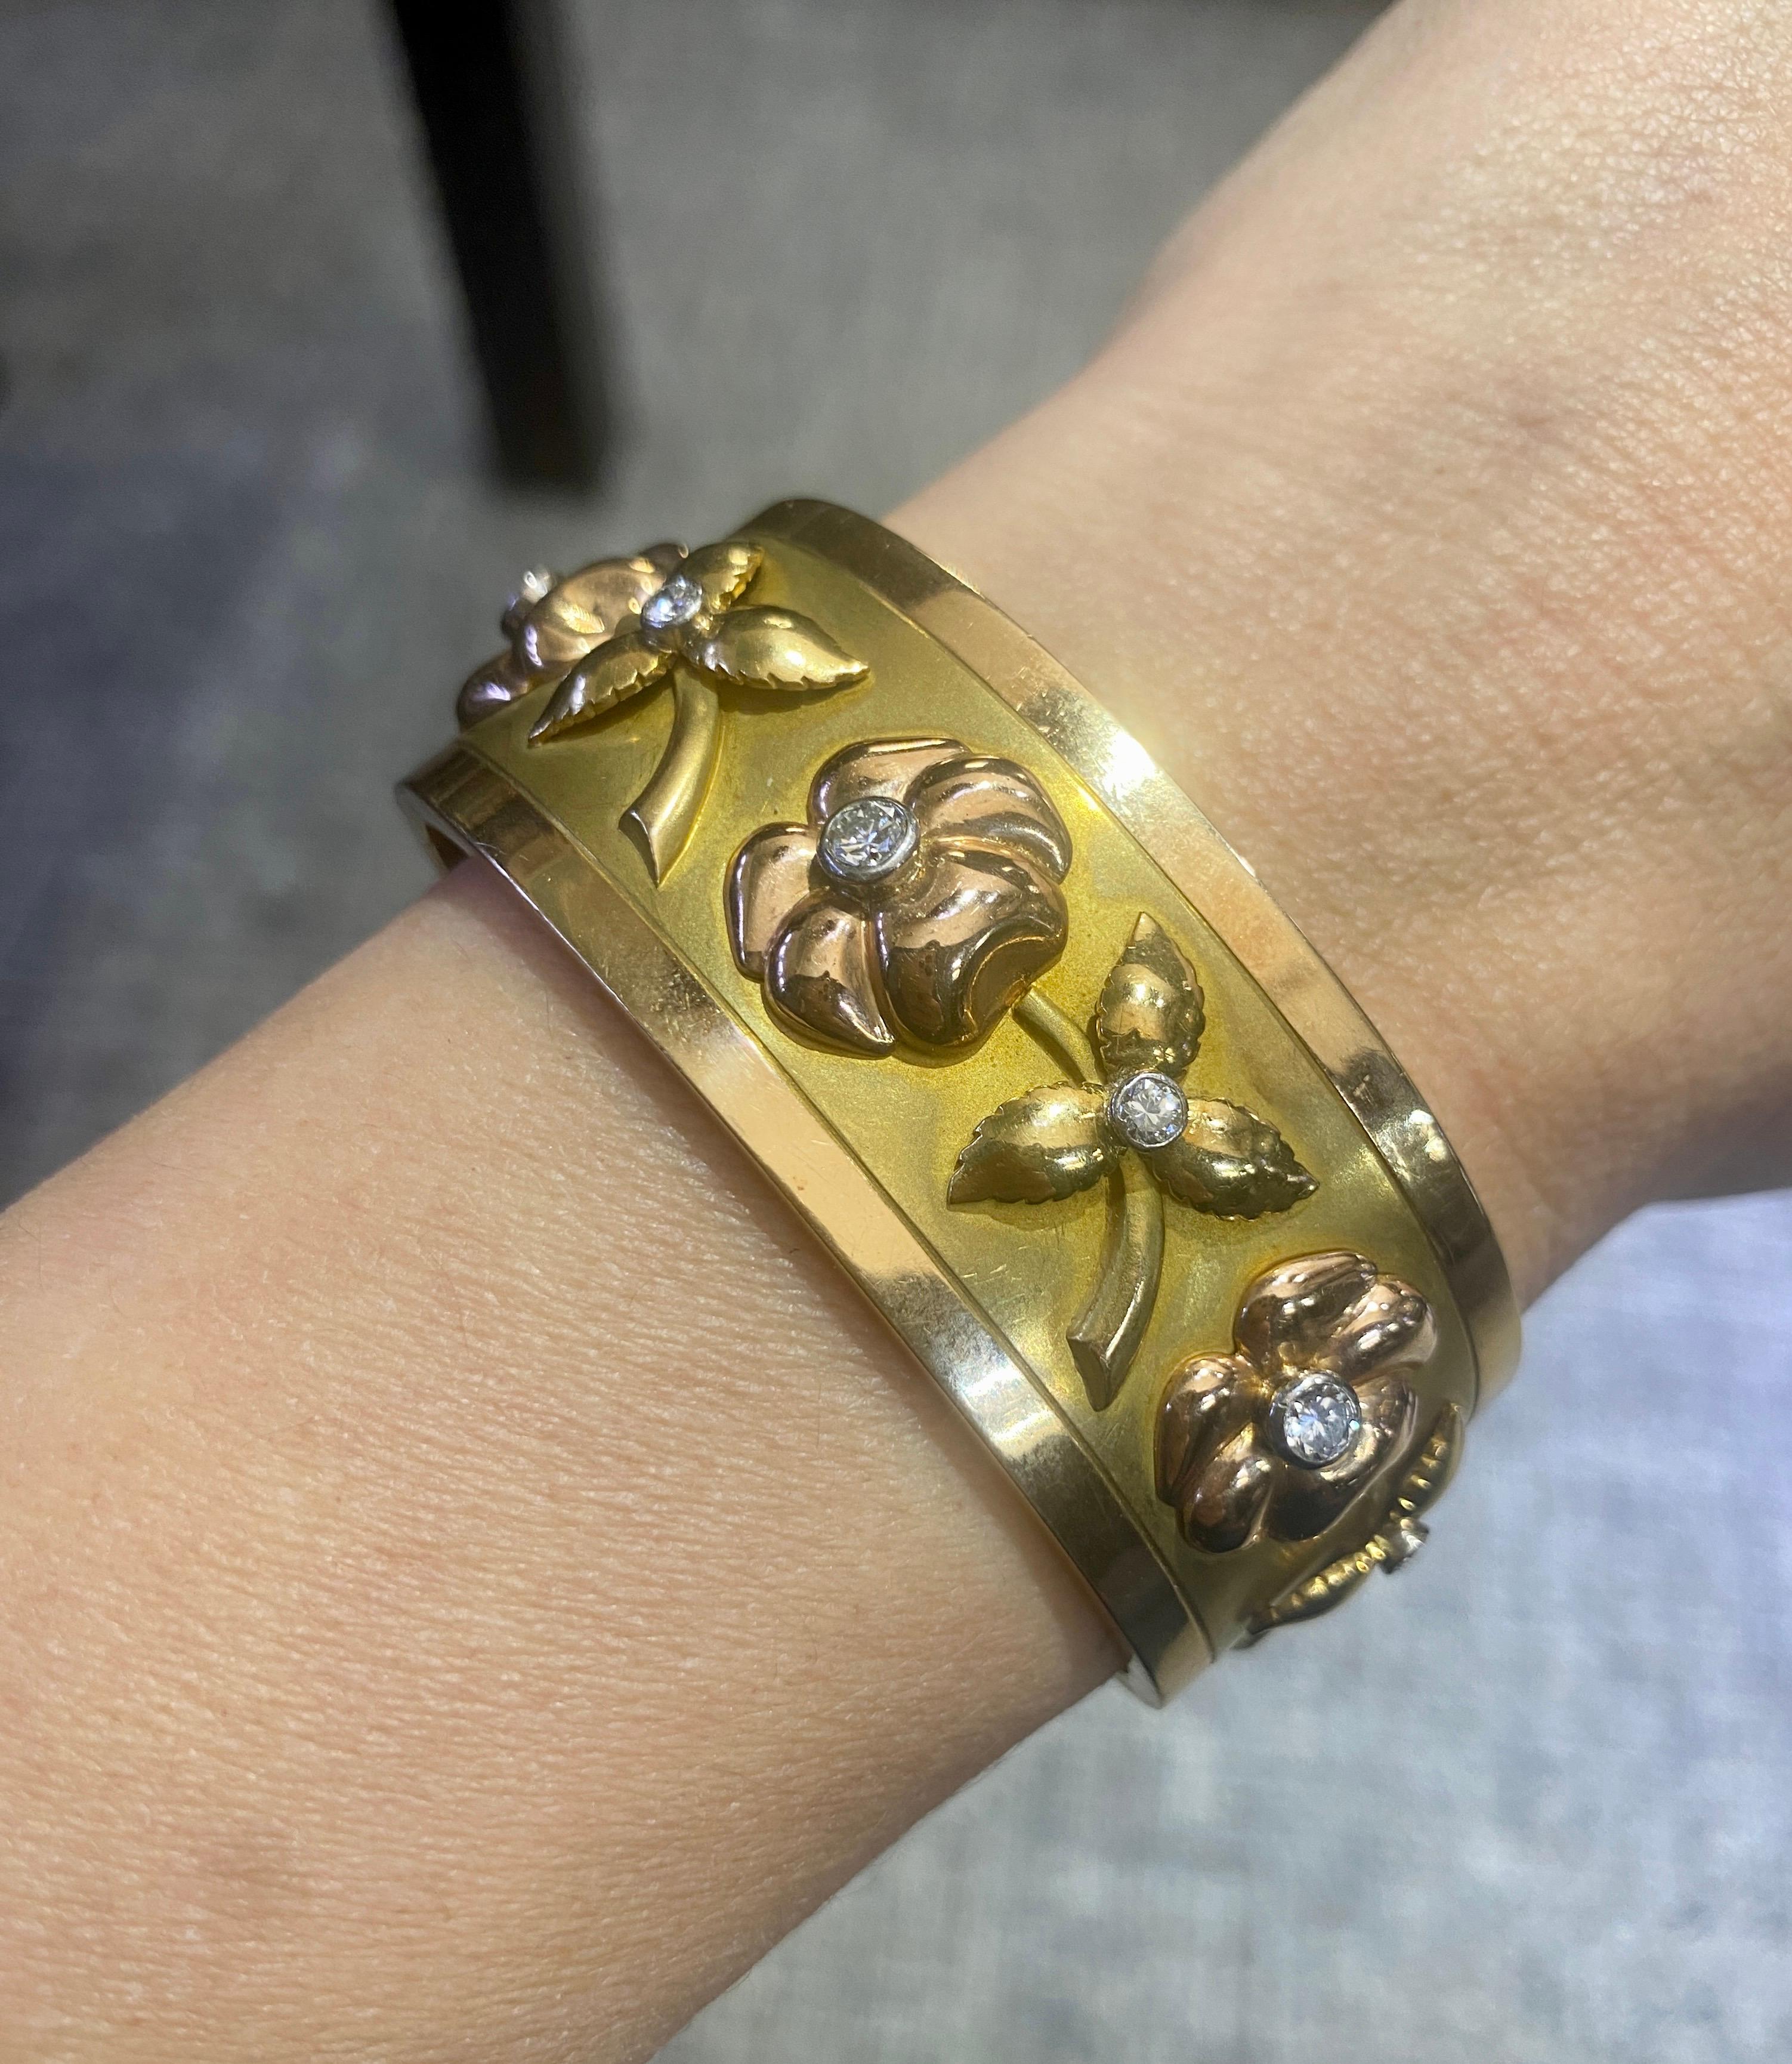 This stunning 1970s French 18 k gold bangle is beautifully made from yellow and rose gold. The design consists of alternating flower and leaf patterns in yellow and rose gold with a round diamond at the center of each. 

The bangle is a wonderfully